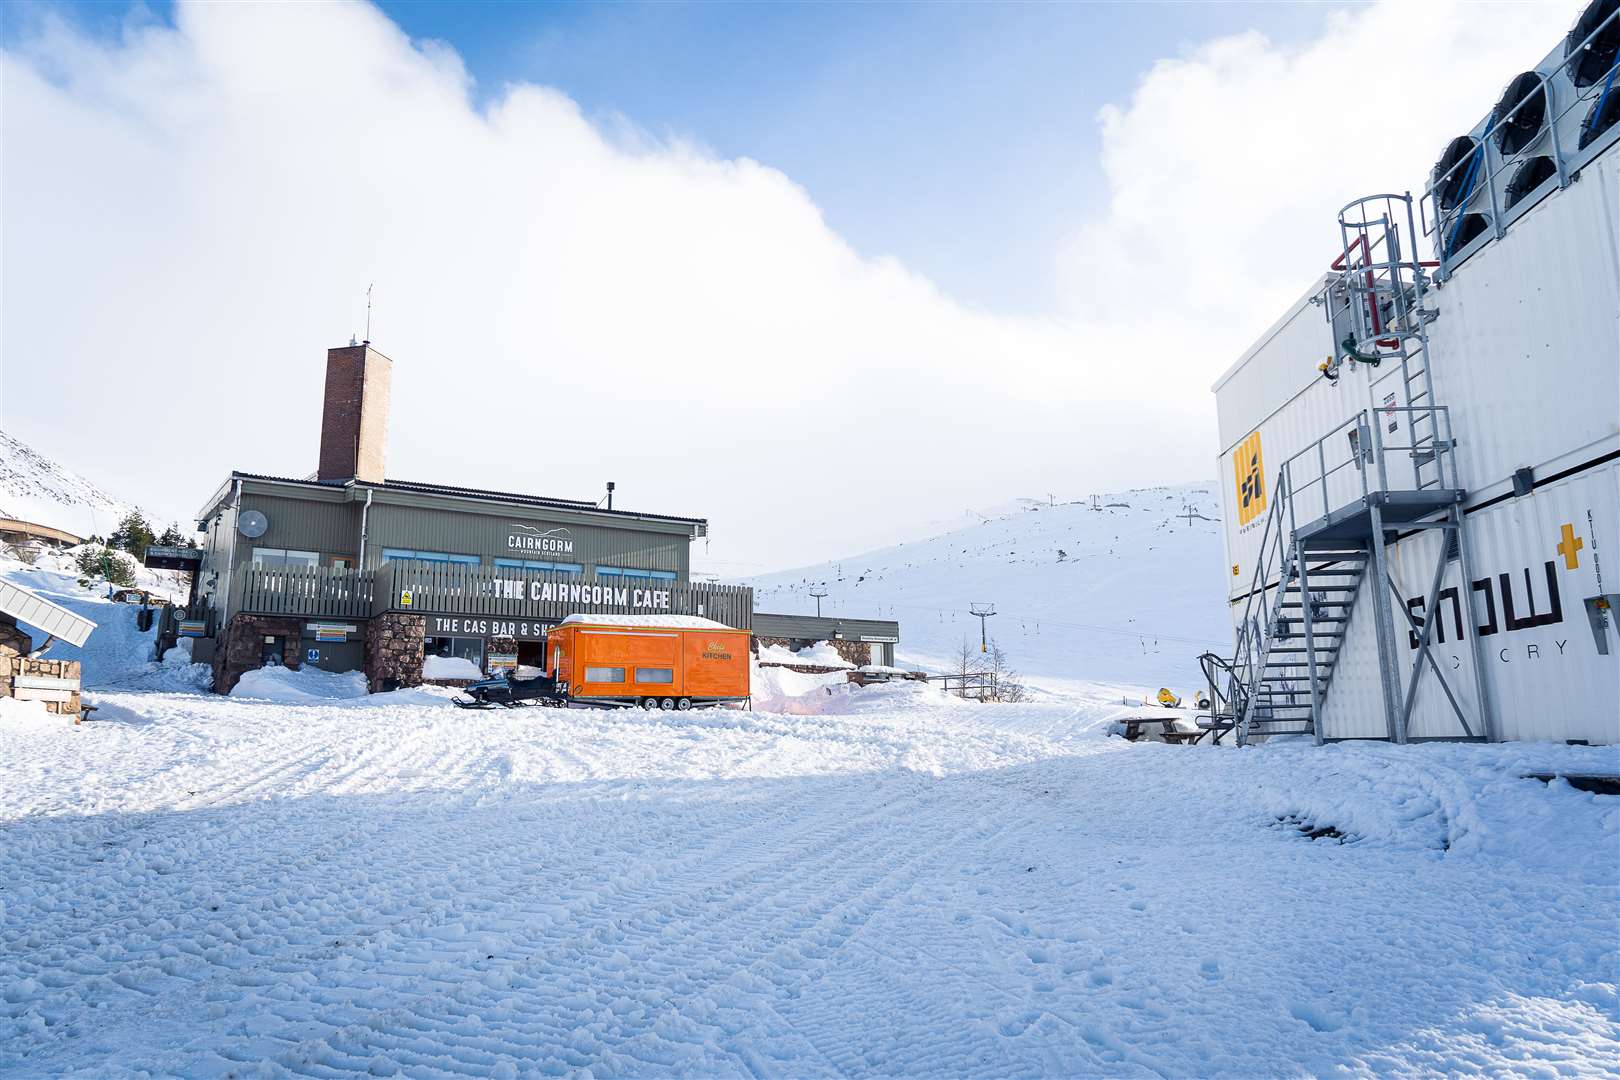 The SnowFactory at Cairngorm Mountain. Photo: Angus Trinder.